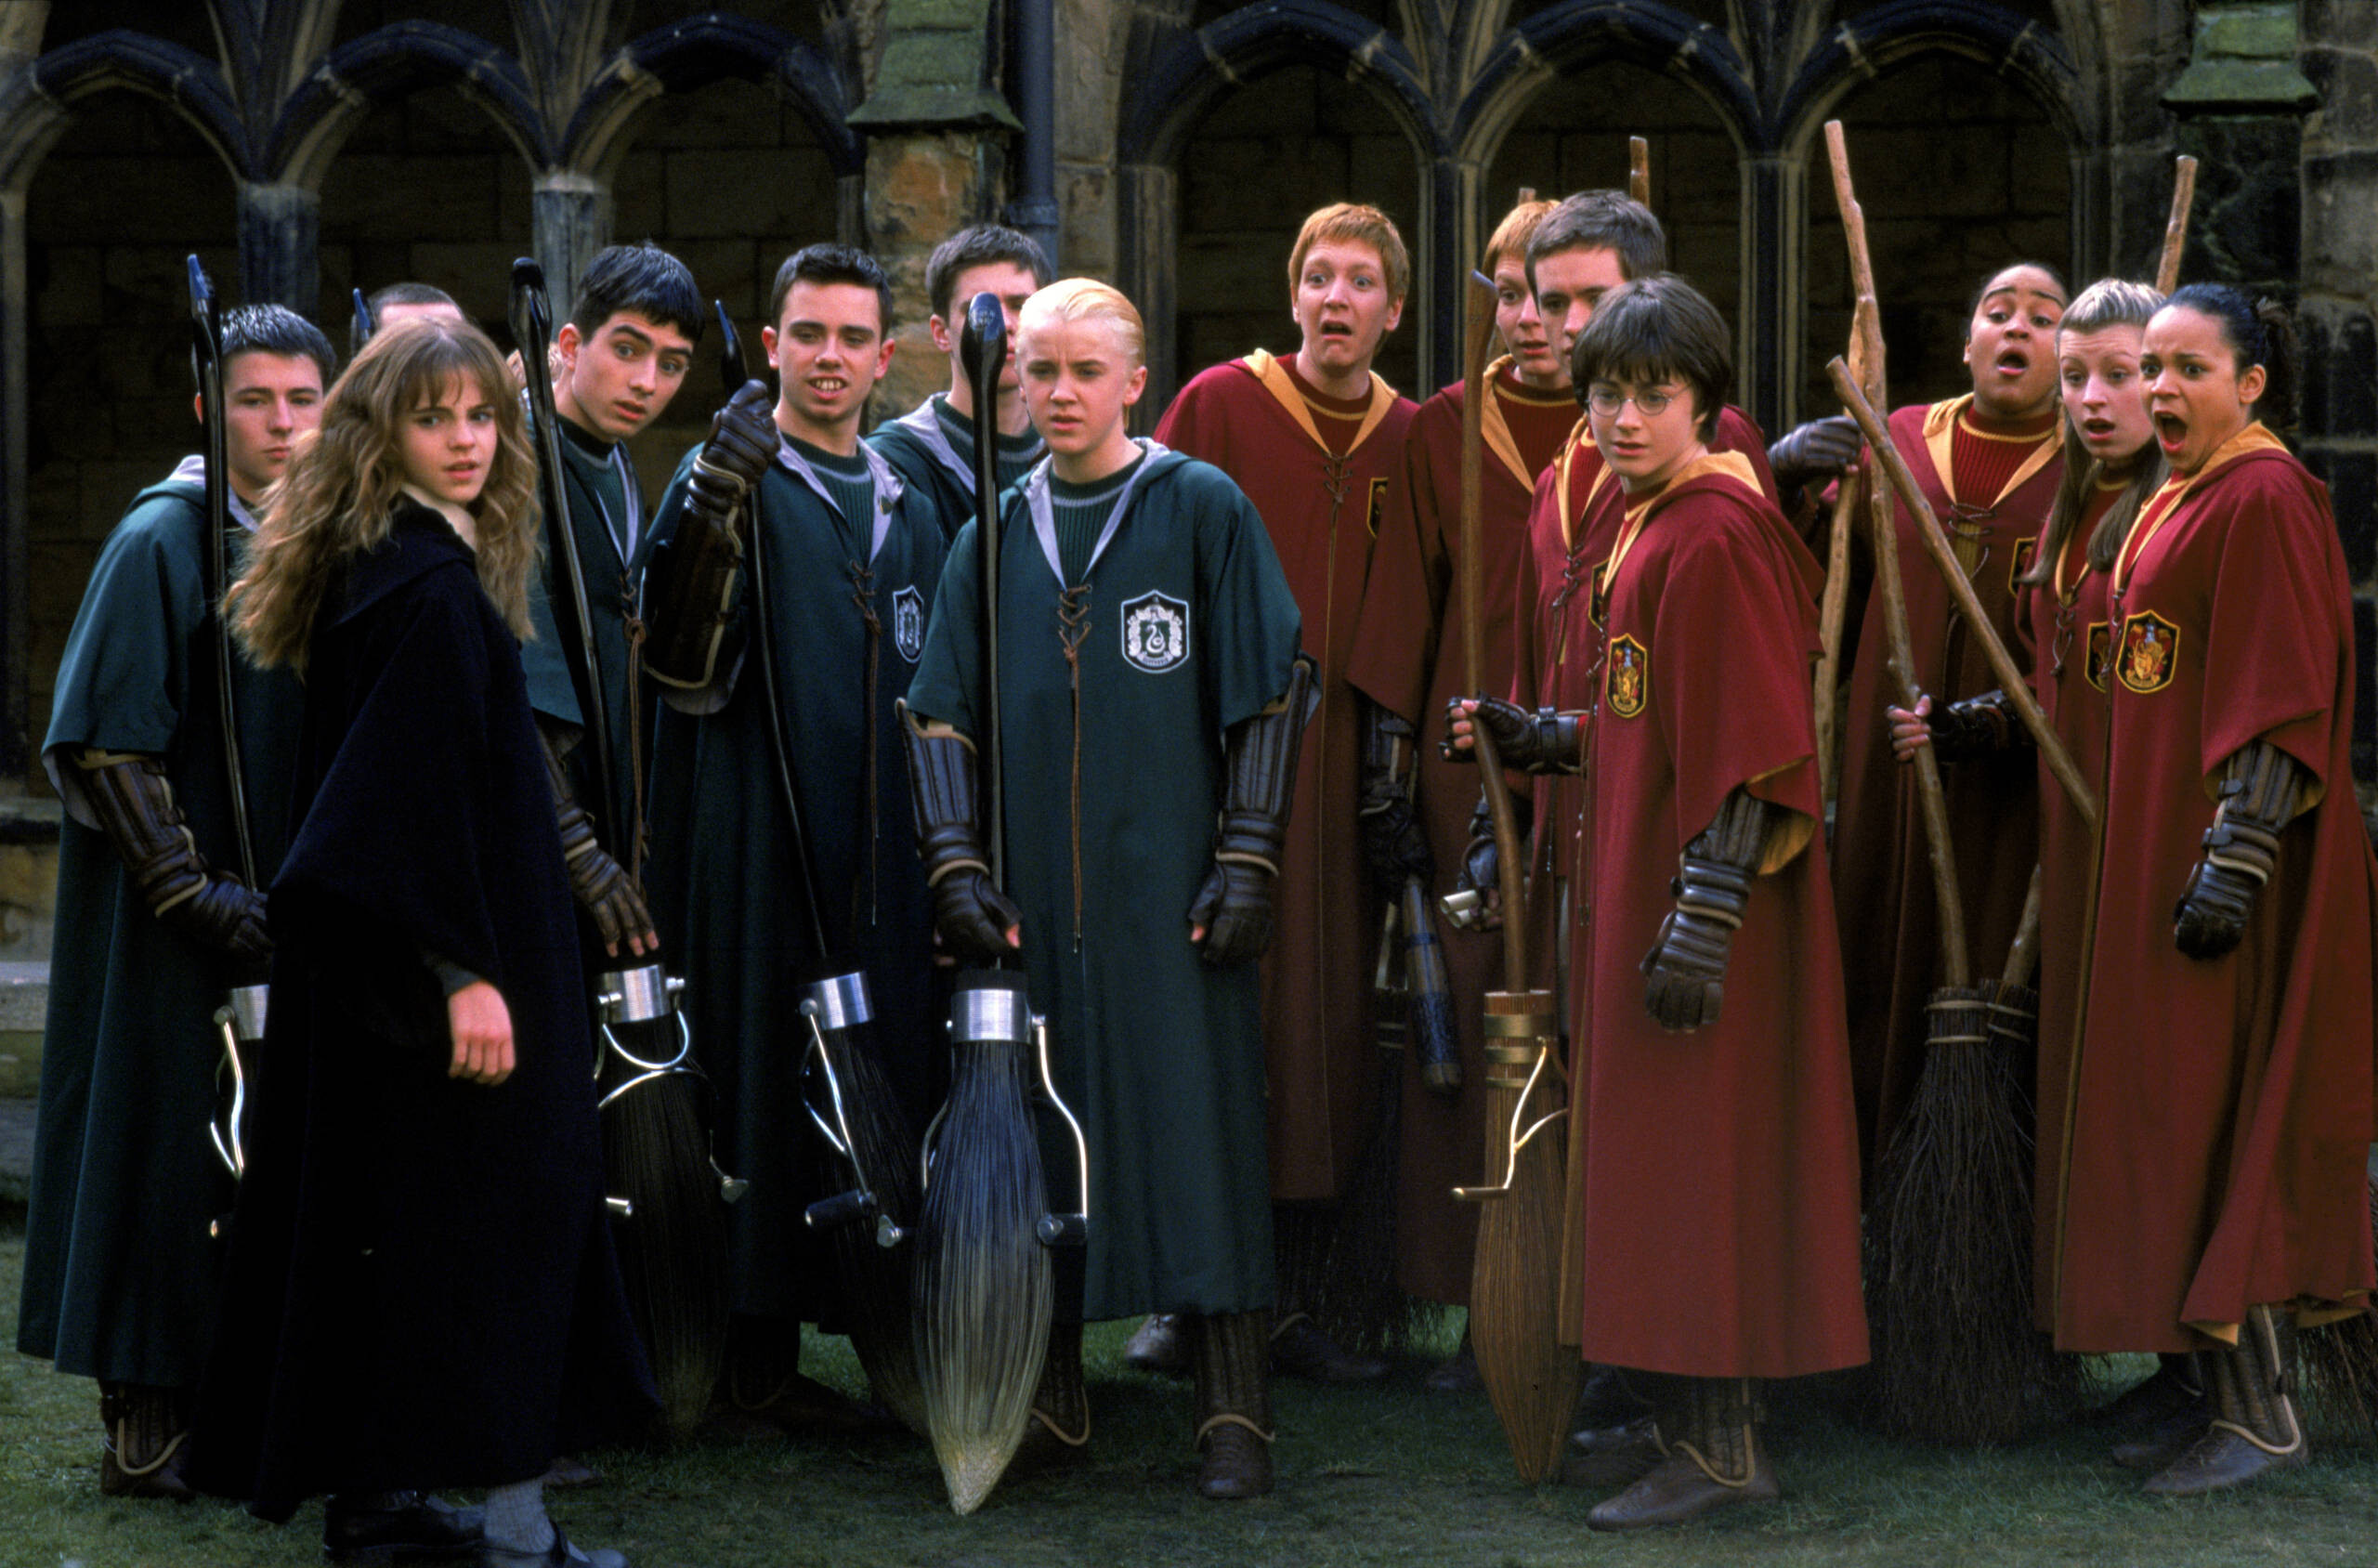 what is a chaser in quidditch?